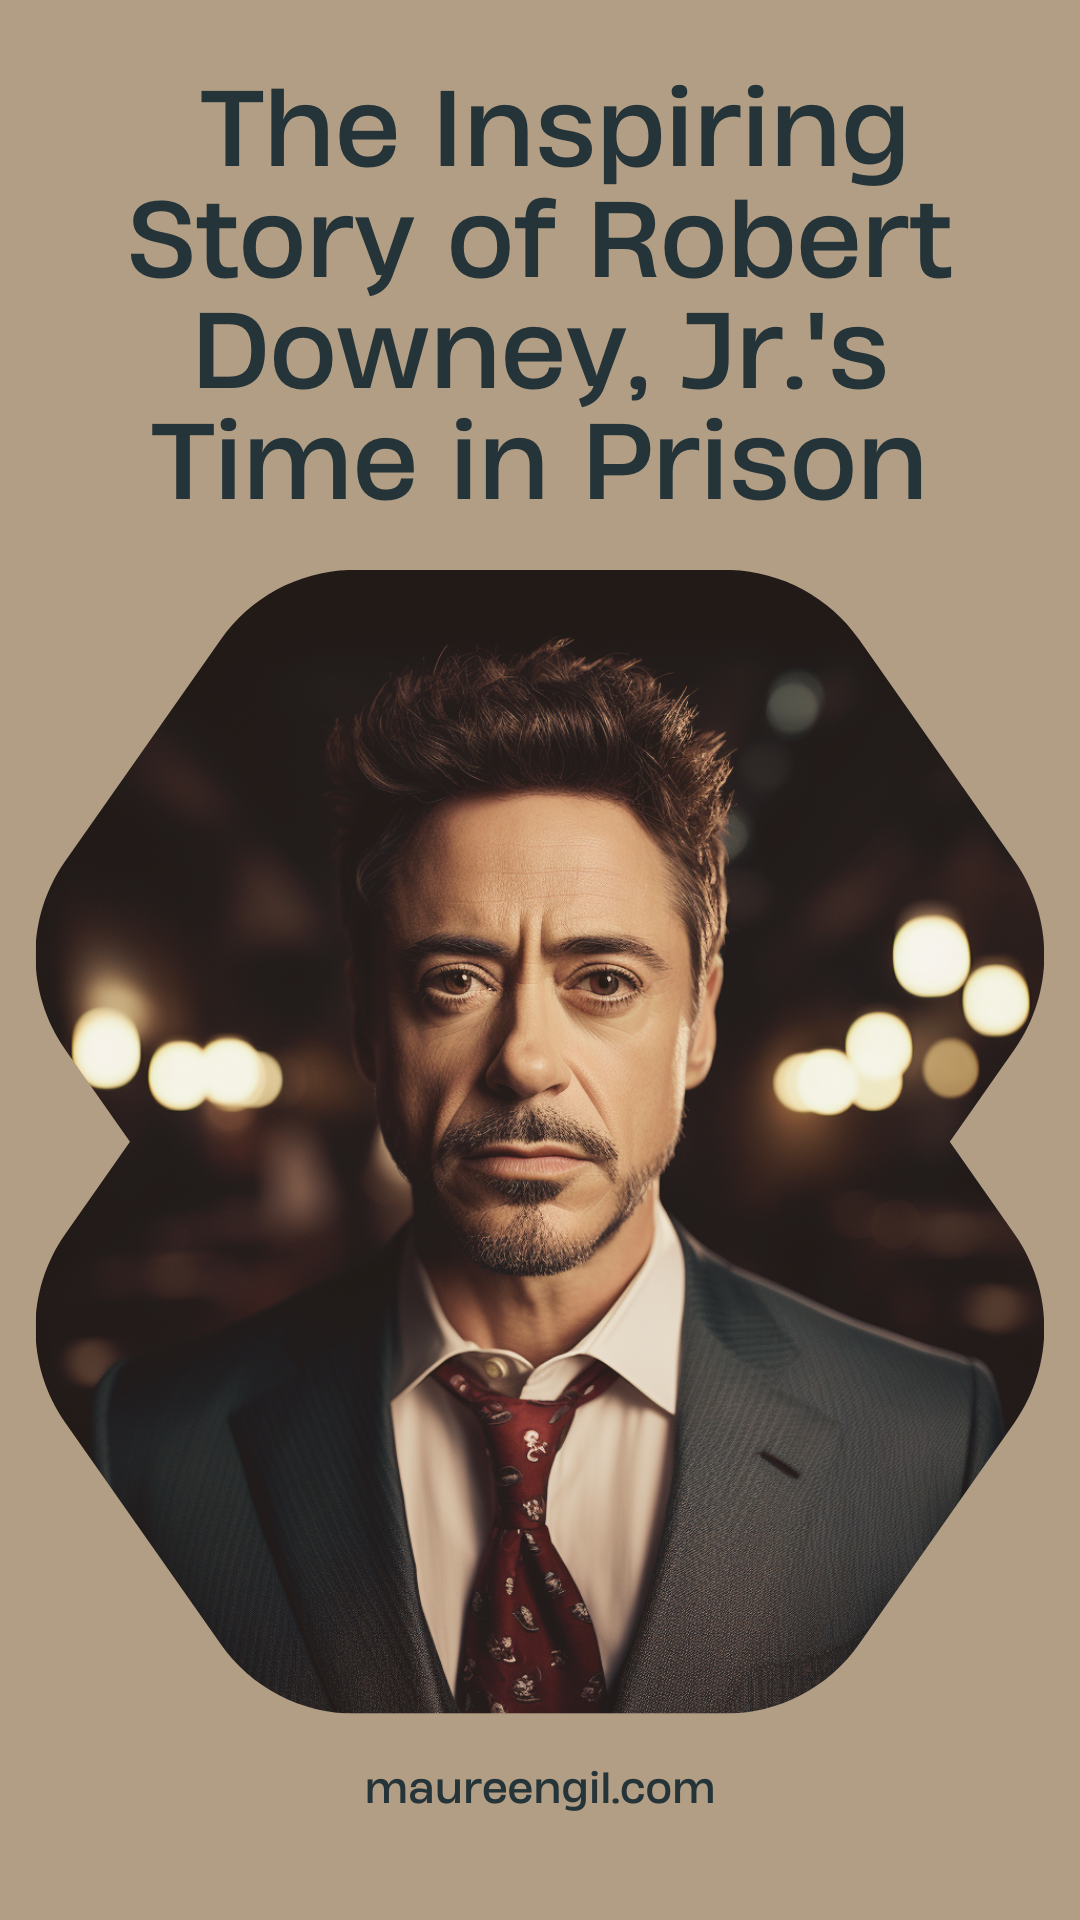 Robert Downey, Jr.'s time in prison was a turning point in his life. Learn about his journey to becoming one of Hollywood's most beloved actors in this inspiring story.